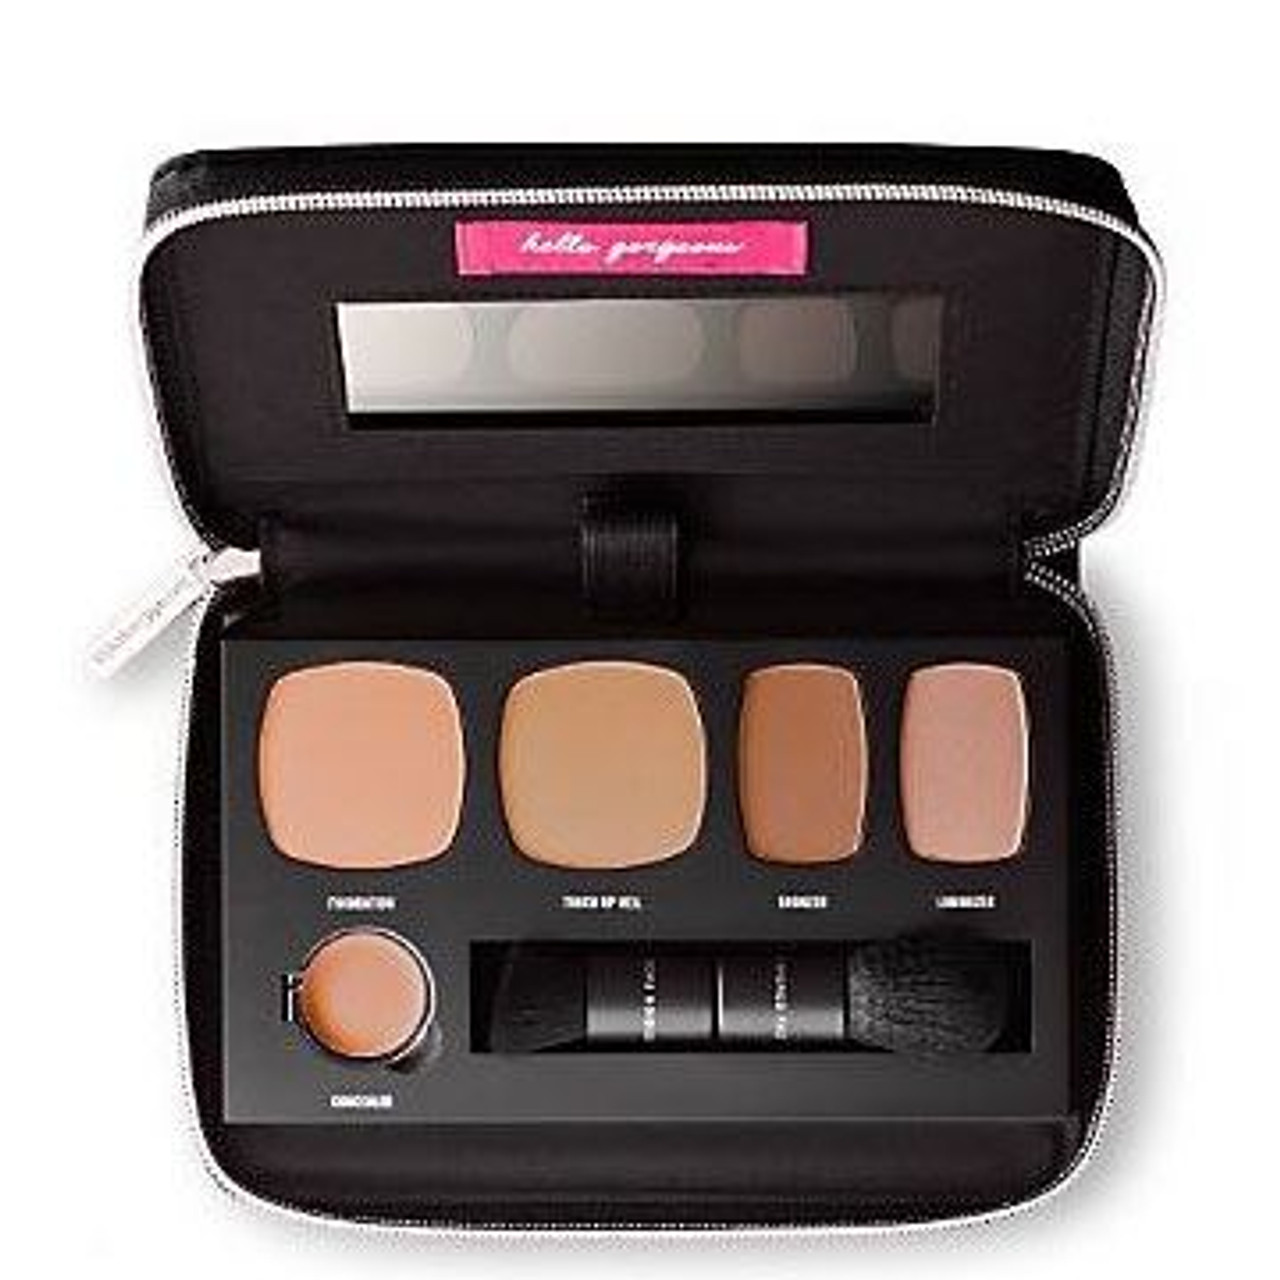 BareMinerals READY To Go Complexion Perfection Palette - R210 Medium (65974)